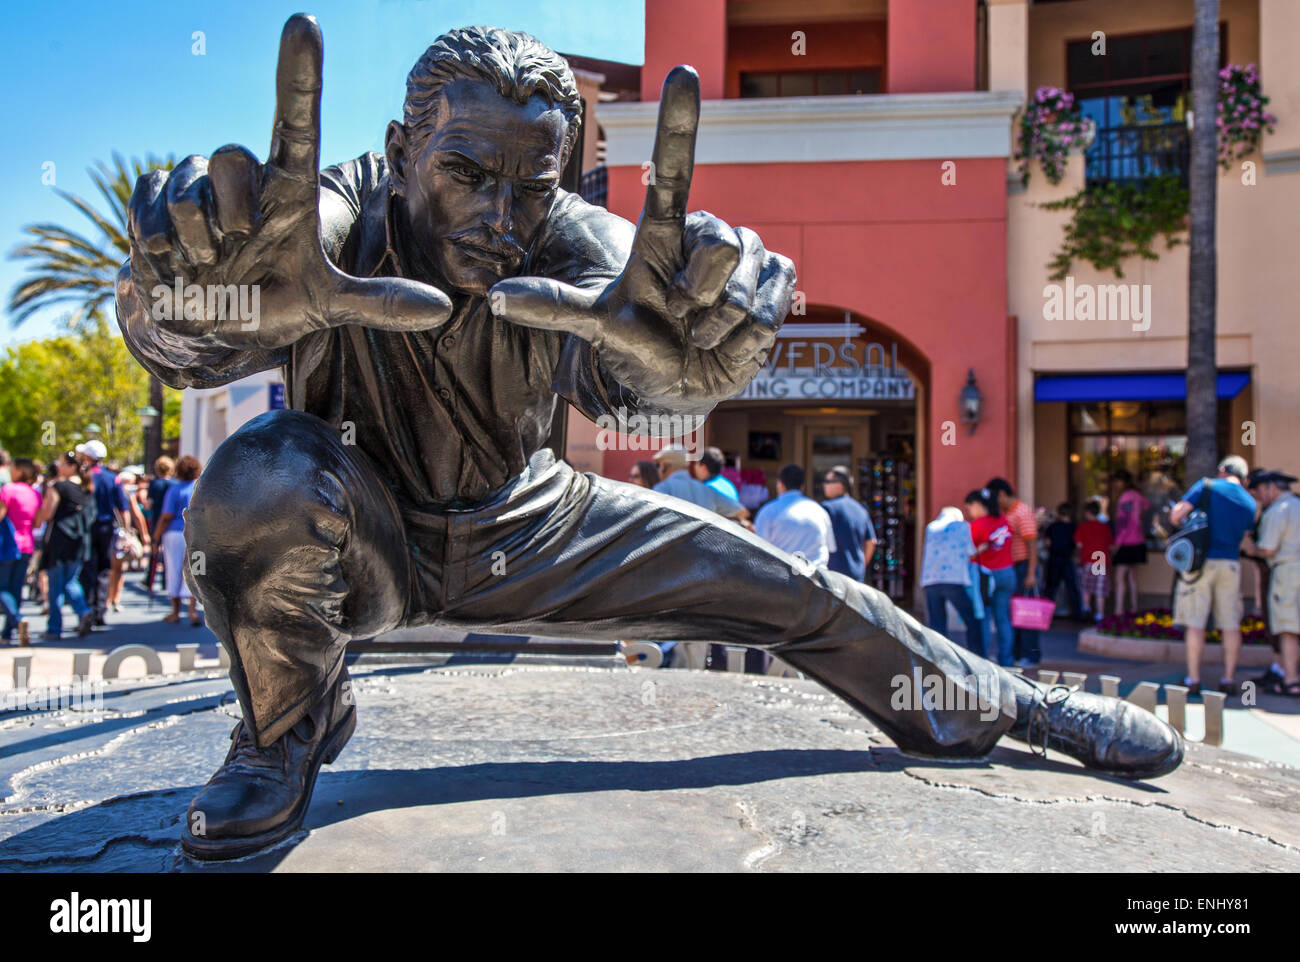 U.S.A., California, Los Angeles, Hollywood, filmmaker statue in the Universal Studios Stock Photo